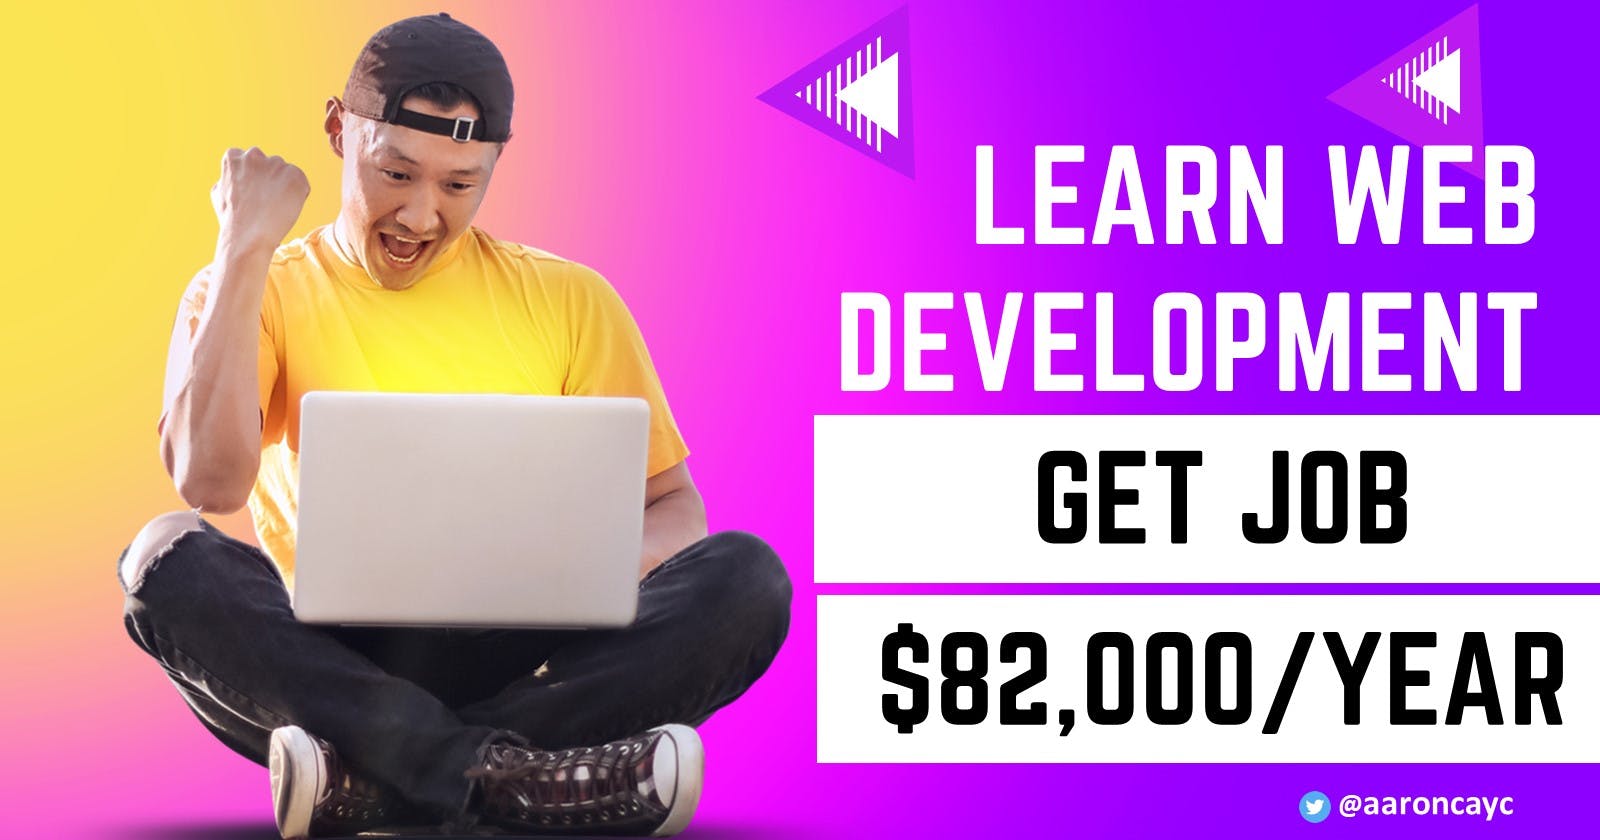 Learn Web Development and Get Job ($82,000/year)